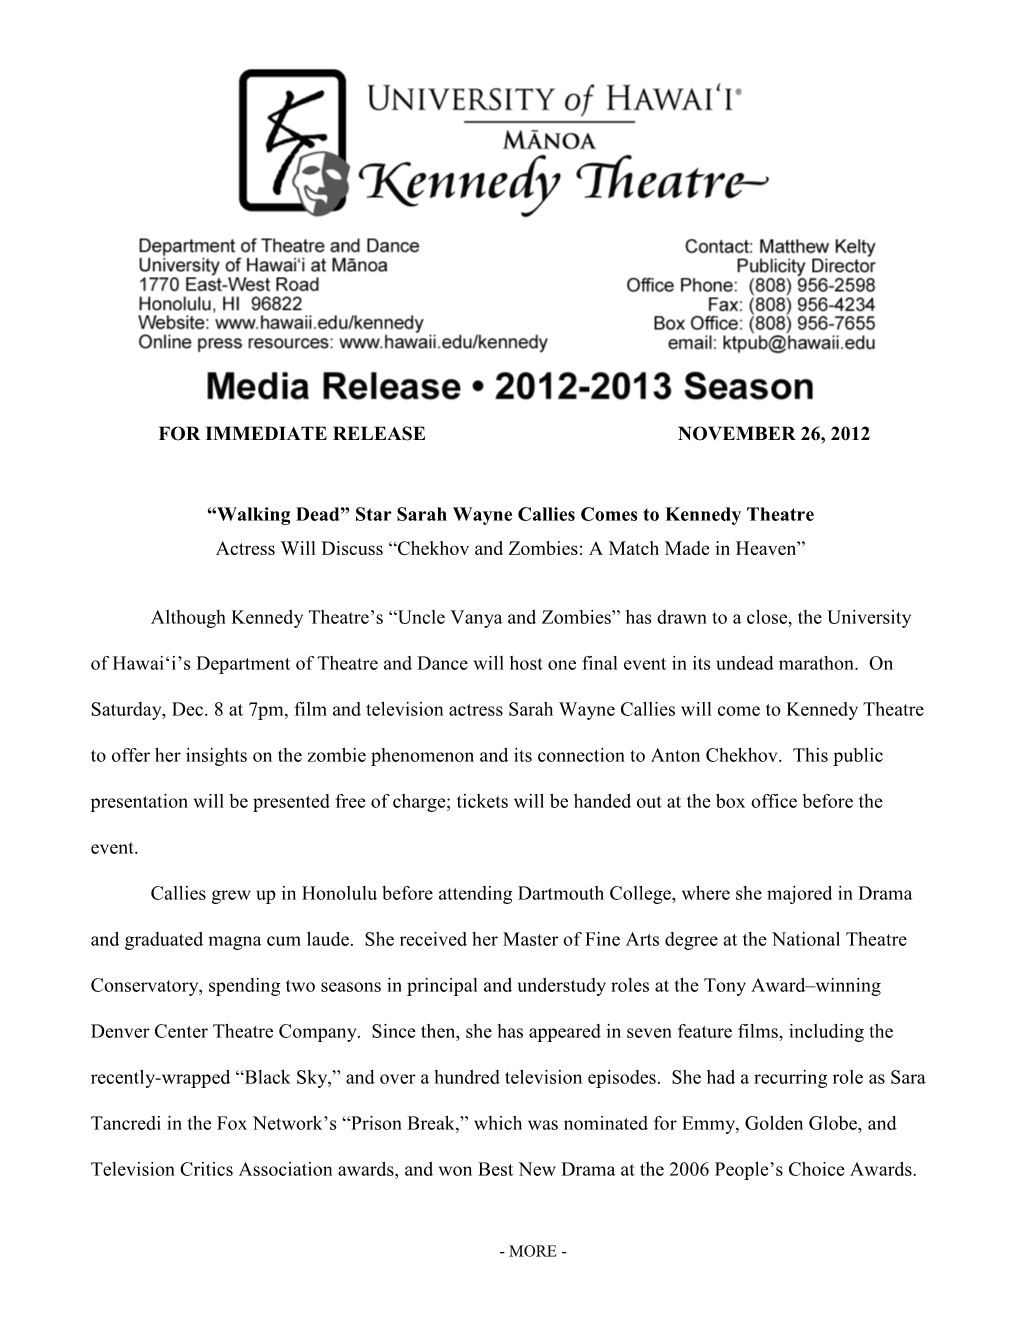 Kennedy Theatre Actress Will Discuss “Chekhov and Zombies: a Match Made in Heaven”